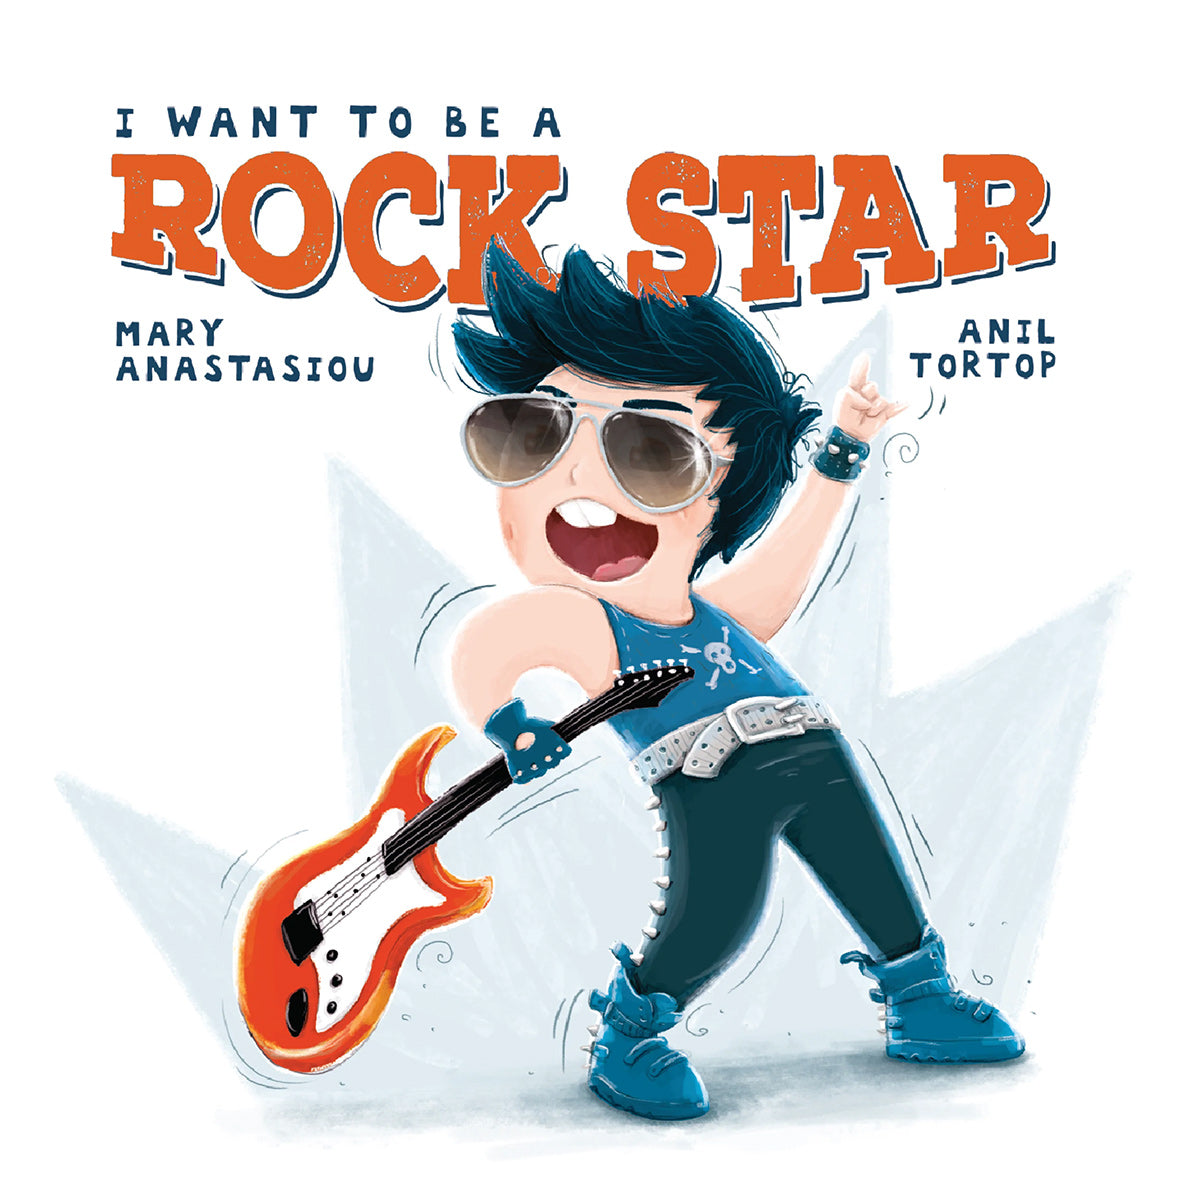 I want to be a Rock Star